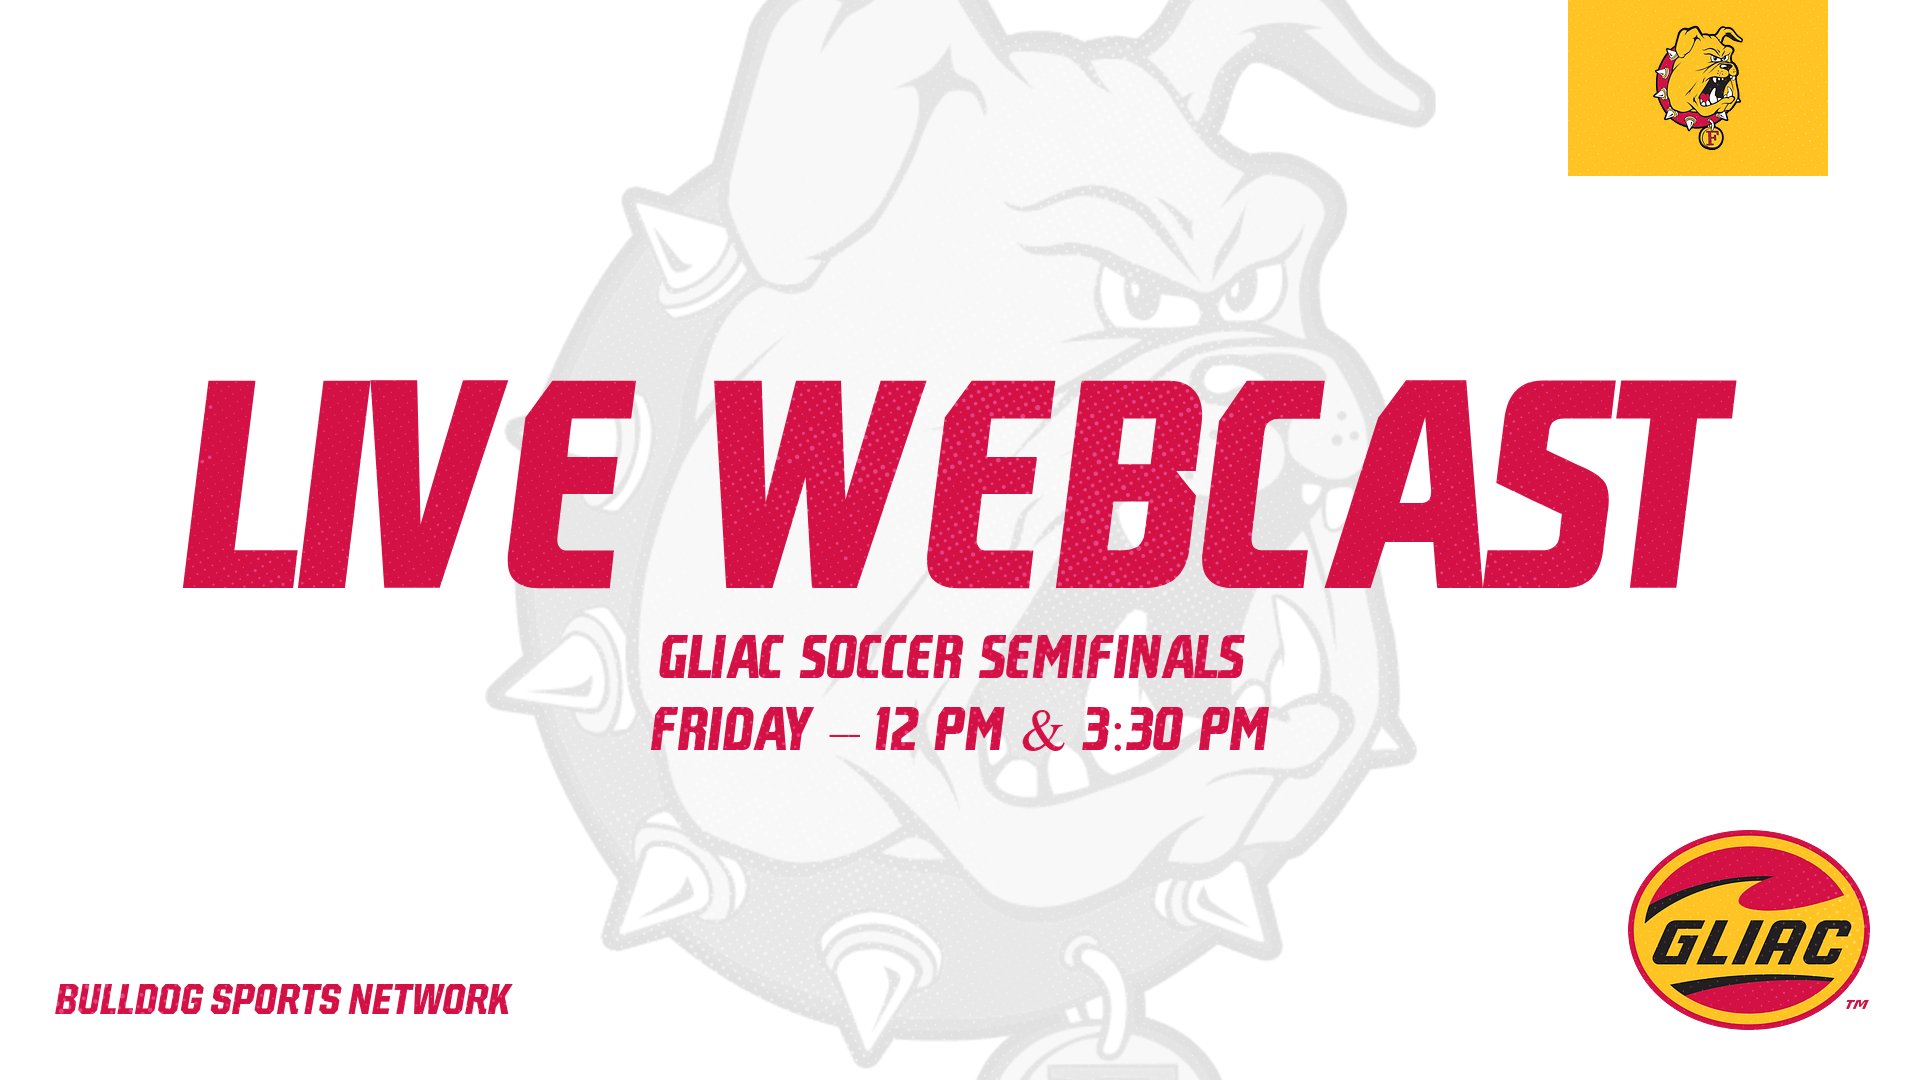 Watch The Live Webcast Of The GLIAC Soccer Semifinals On Friday